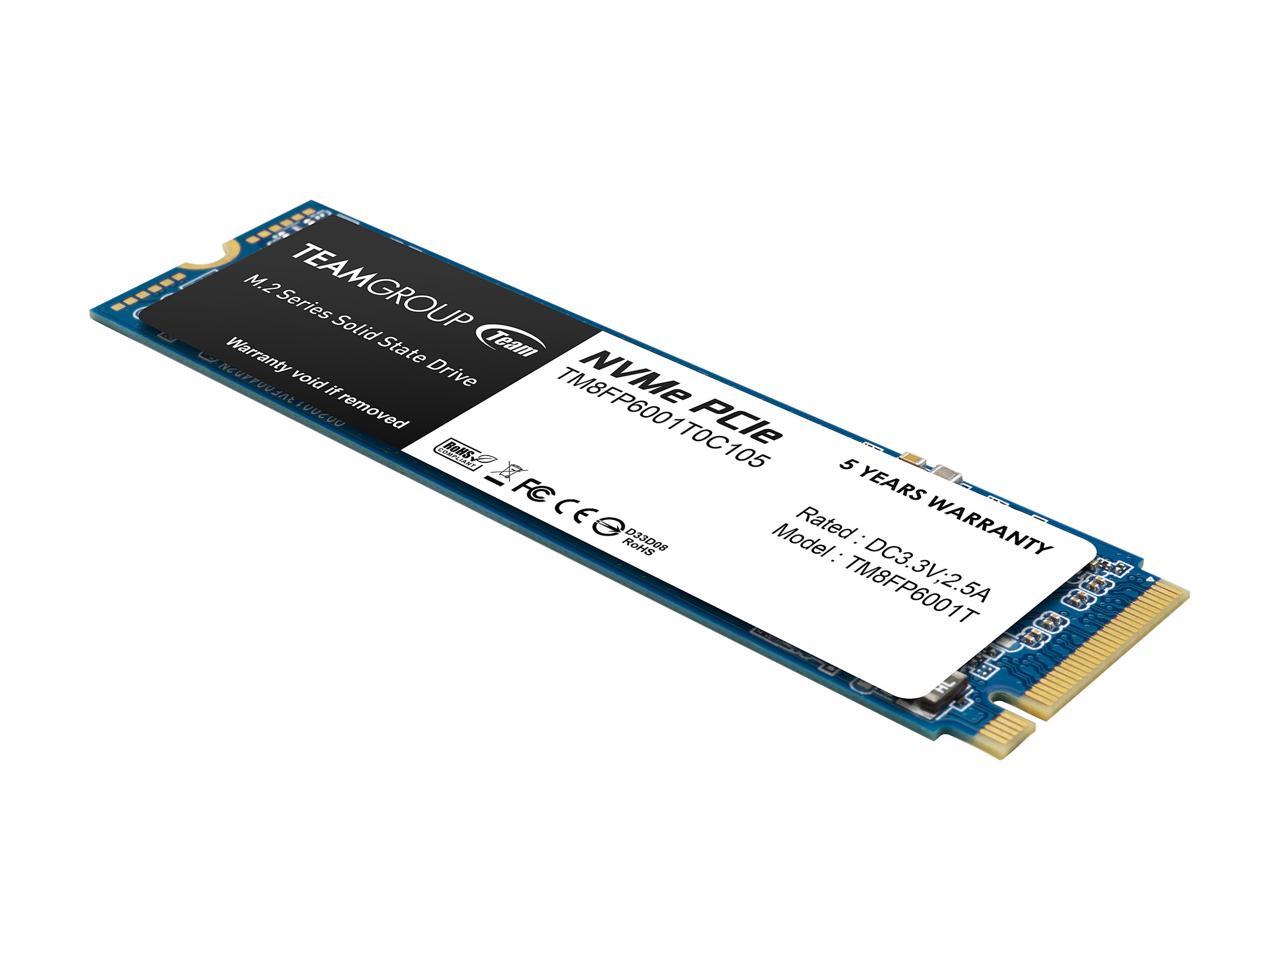 1TB Team Group MP33 M.2 NVMe PCIe 3.0 SSD $70 + Free Shipping